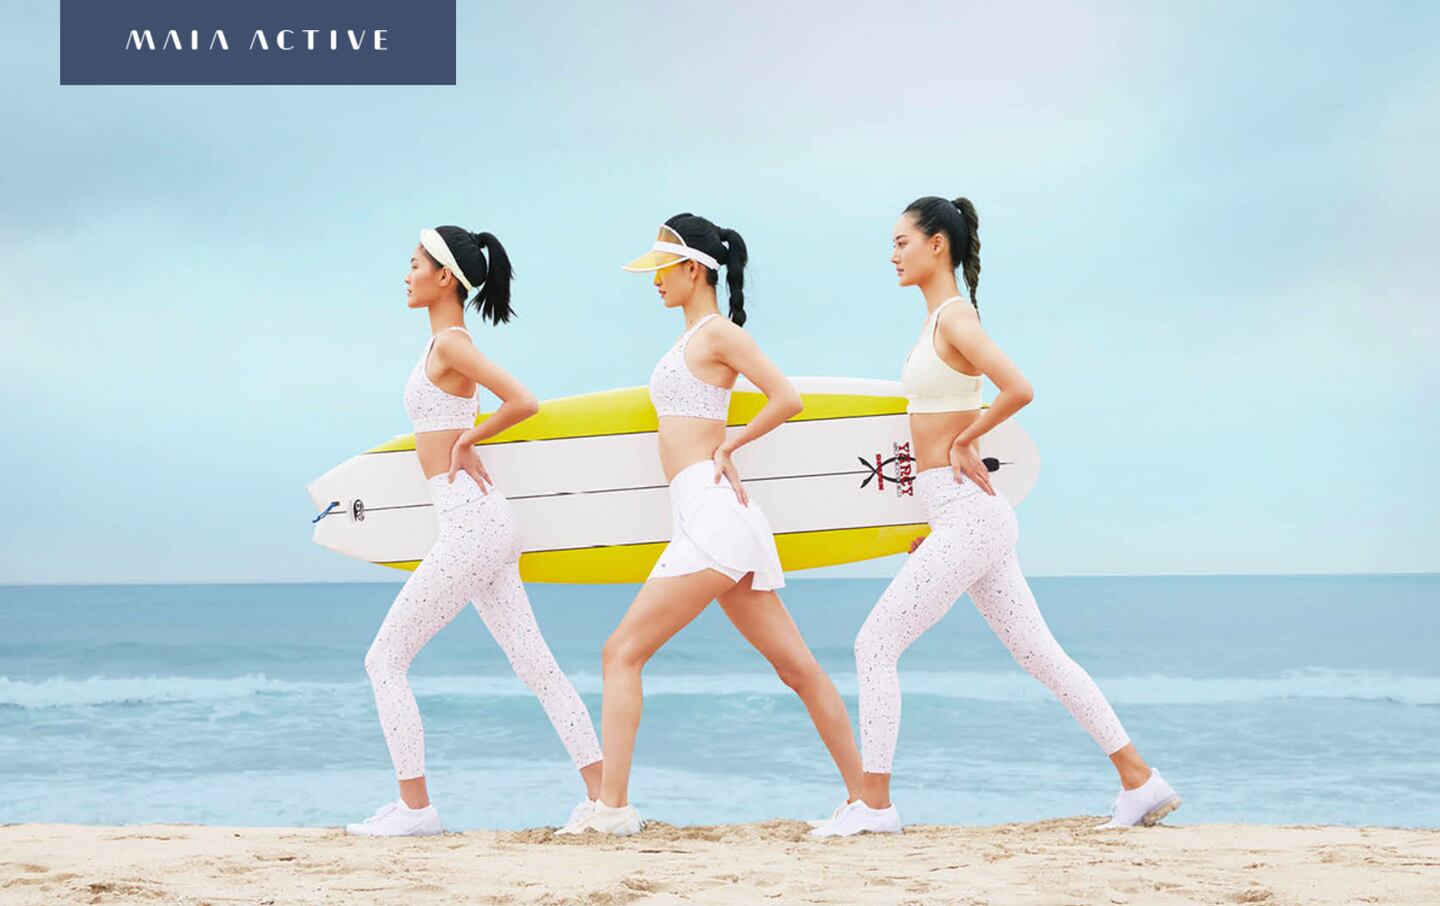 Three models on the beach hold a surfboard while wearing Maia Active clothes.